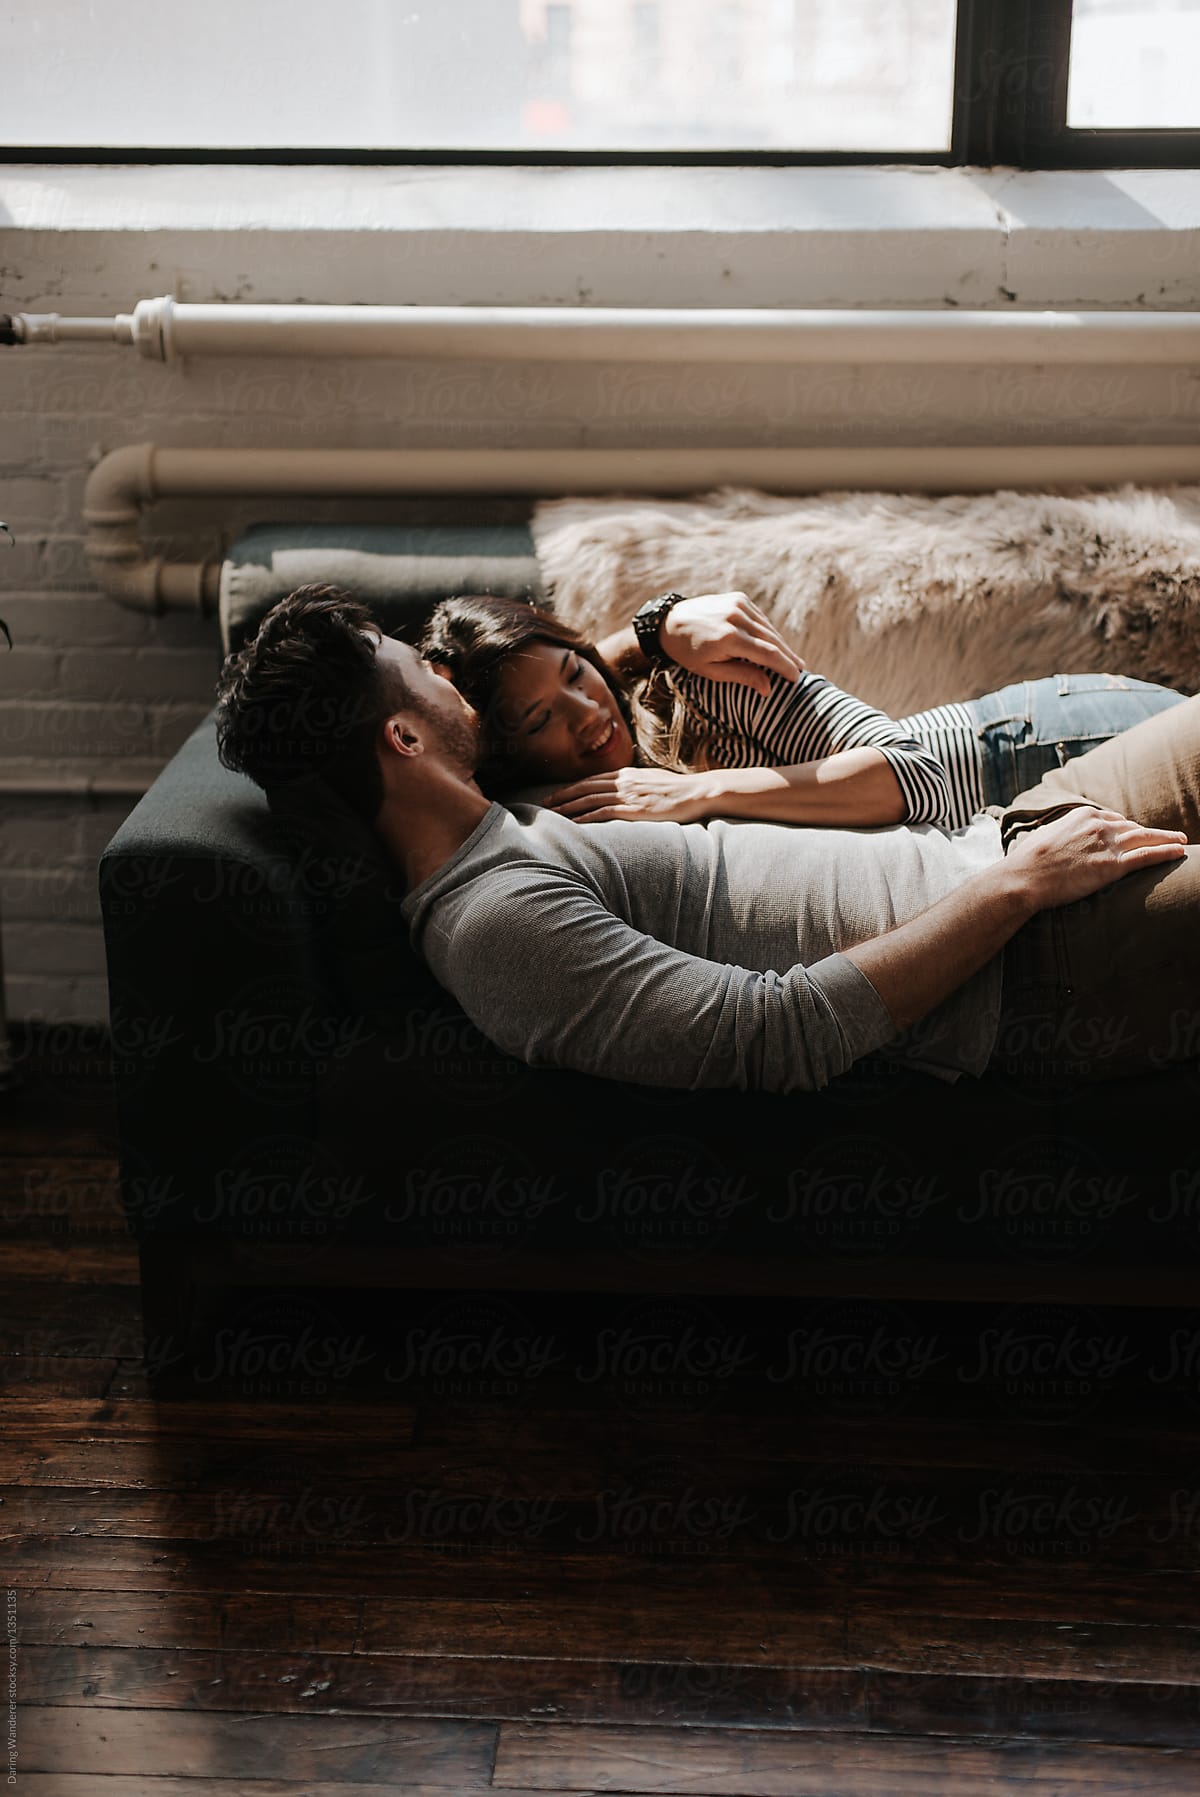 chelsie mills add pictures of interracial couples cuddling photo